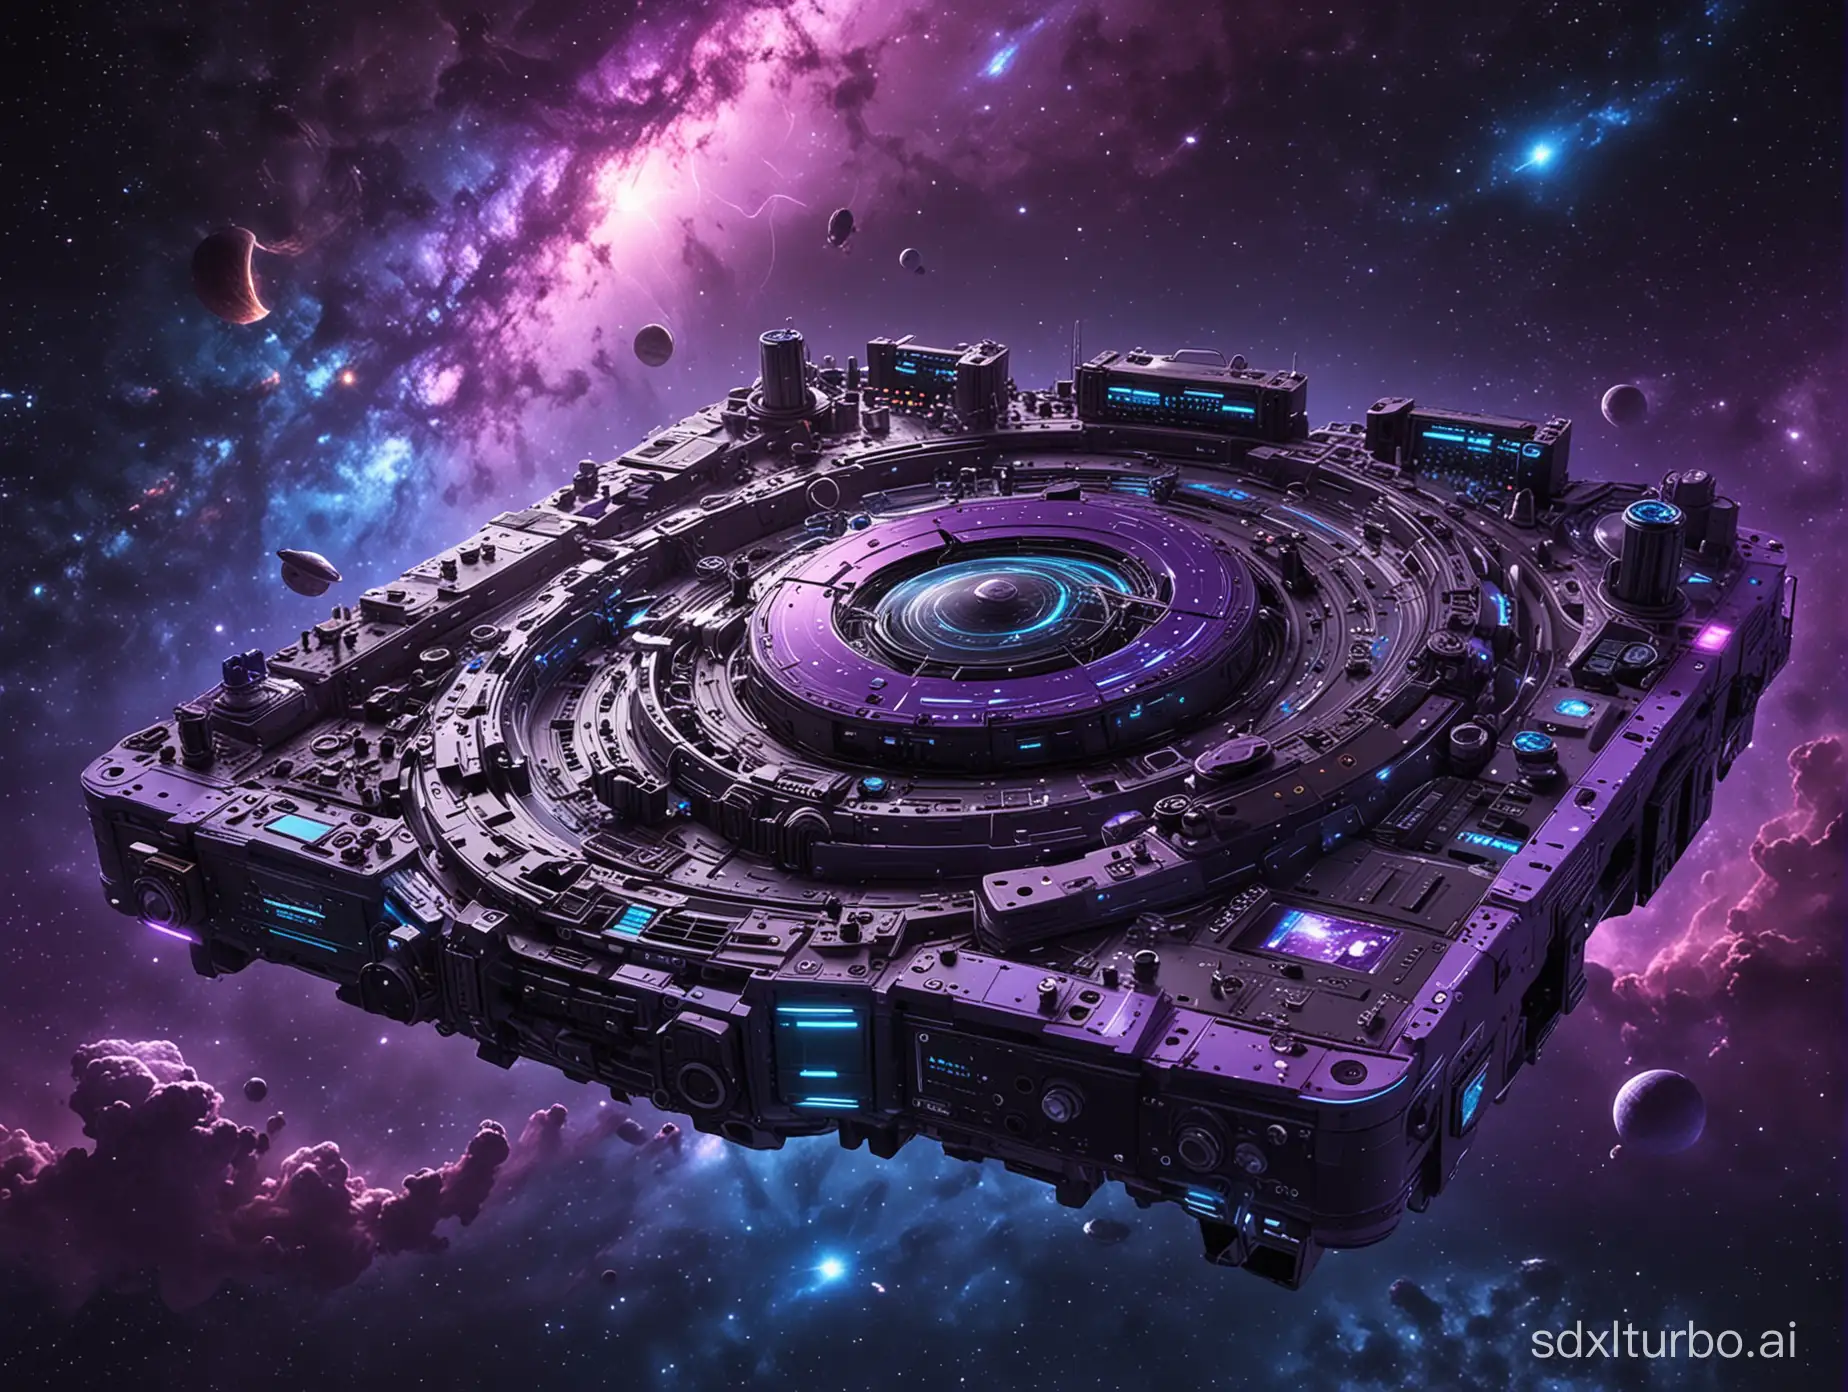 A futuristic concept art piece depicting visionary music technology in outer space. It features advanced DJ equipment, such as DJ-Contollers, turntables and mixers, integrated into a space station's console, with an astronaut DJ curating cosmic sounds. The backdrop is a vast cosmos, rendered in deep purples and blues, illuminated by nebulae and stars that visualr and rhythmically pulse to the beat of the music. Created Using: futuristic concept art, advanced music technology, space station setting, cosmic soundscape, rhythmic nebulae and stars, deep purple and blue color scheme, visionary depiction of music and space, very detailed --ar 16:9